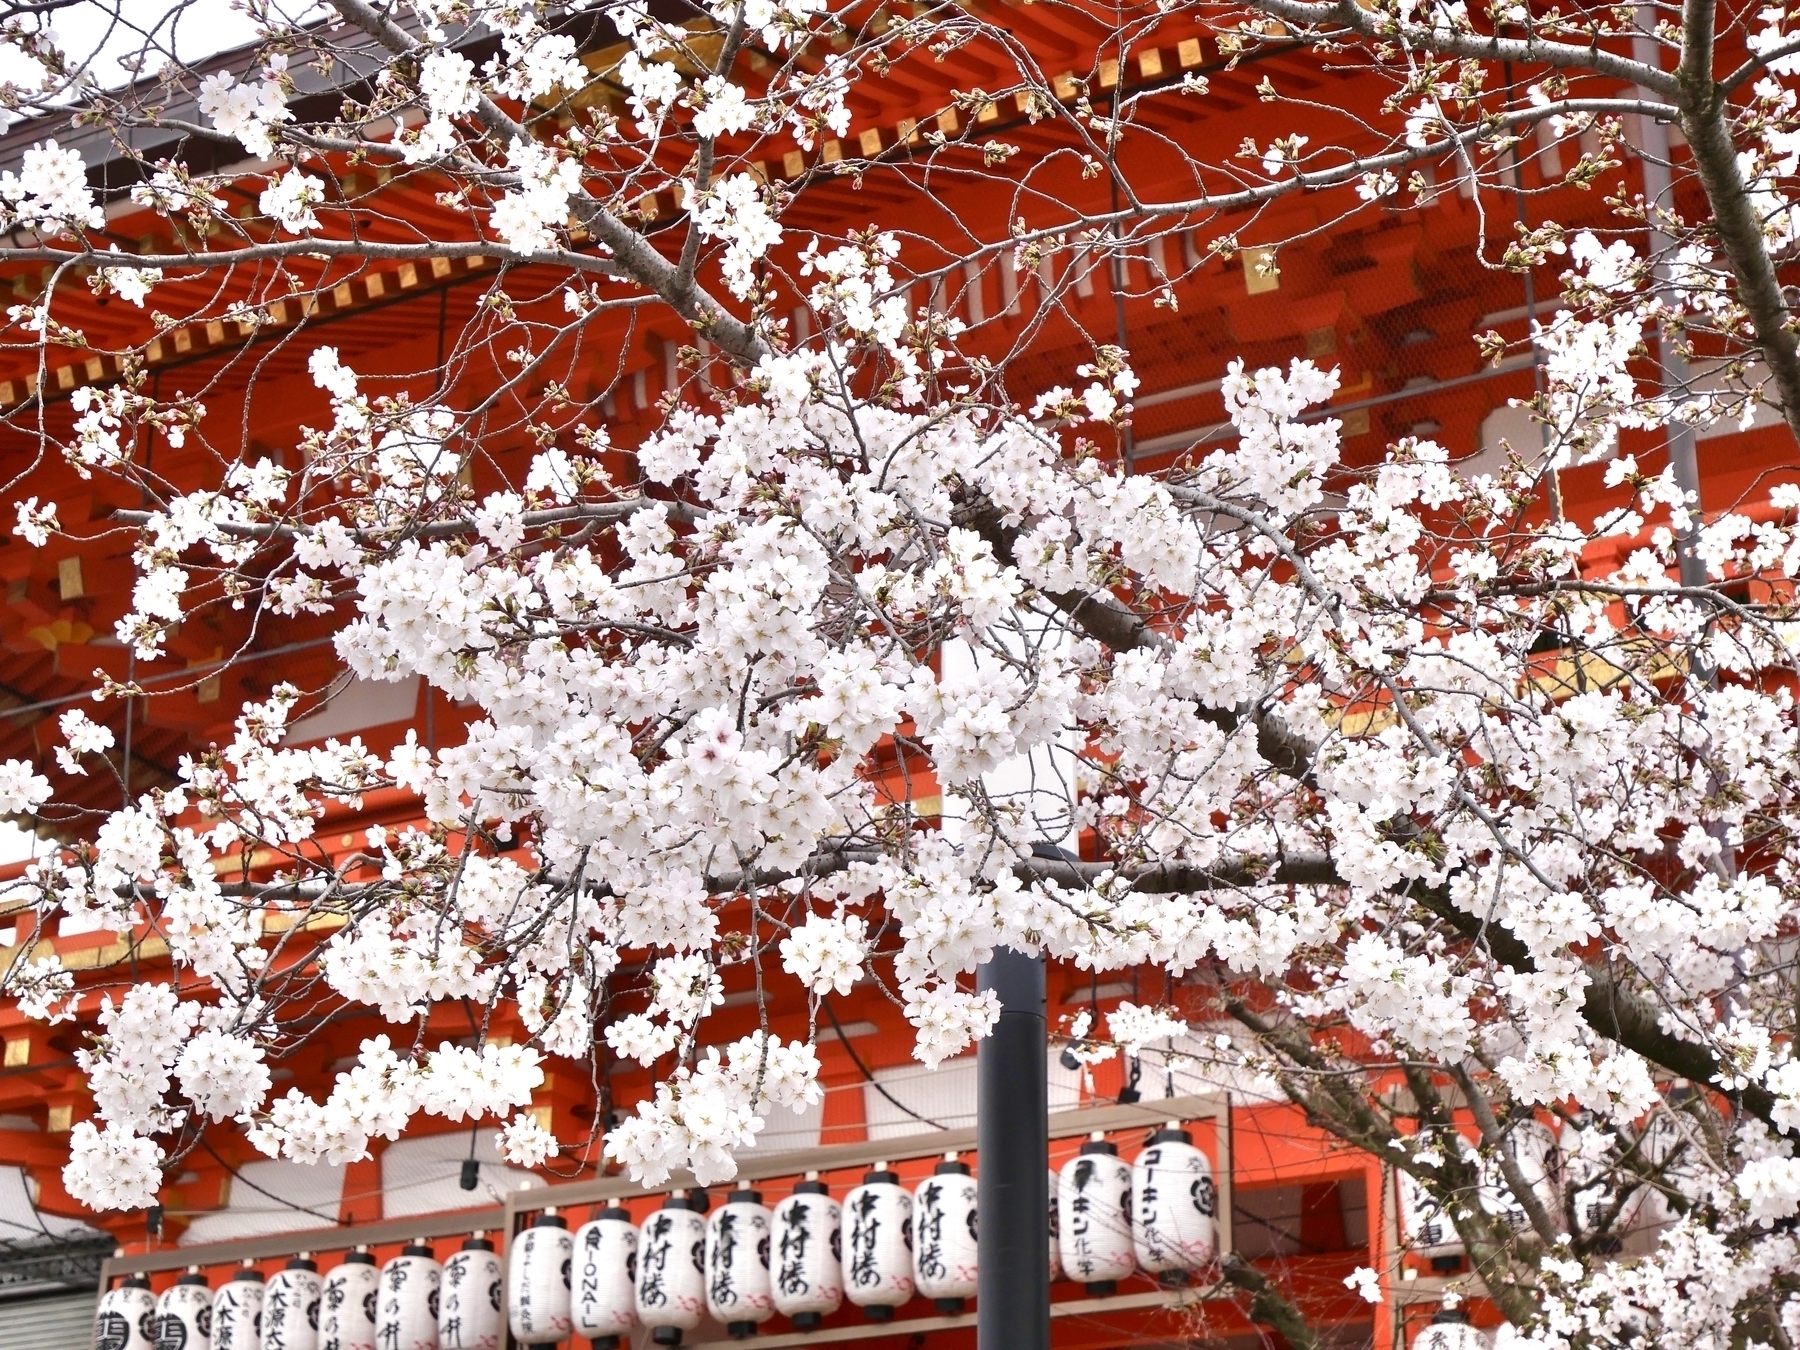 Some cherry blossoms blooming by the east gate of Yasaka Shrine